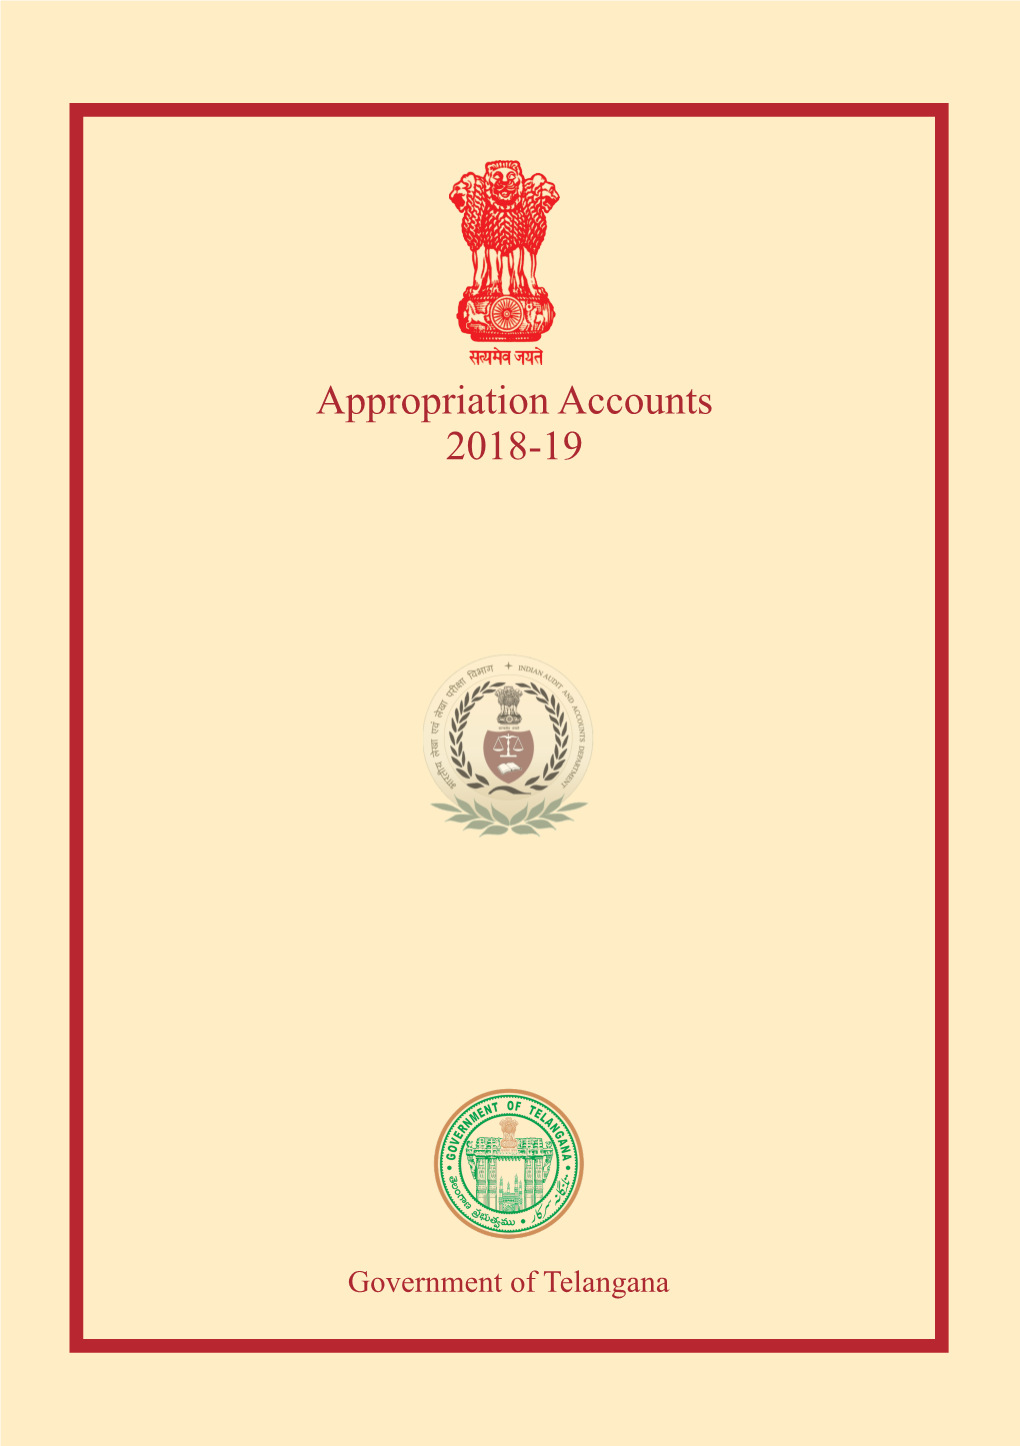 Appropriation Accounts 2018-19